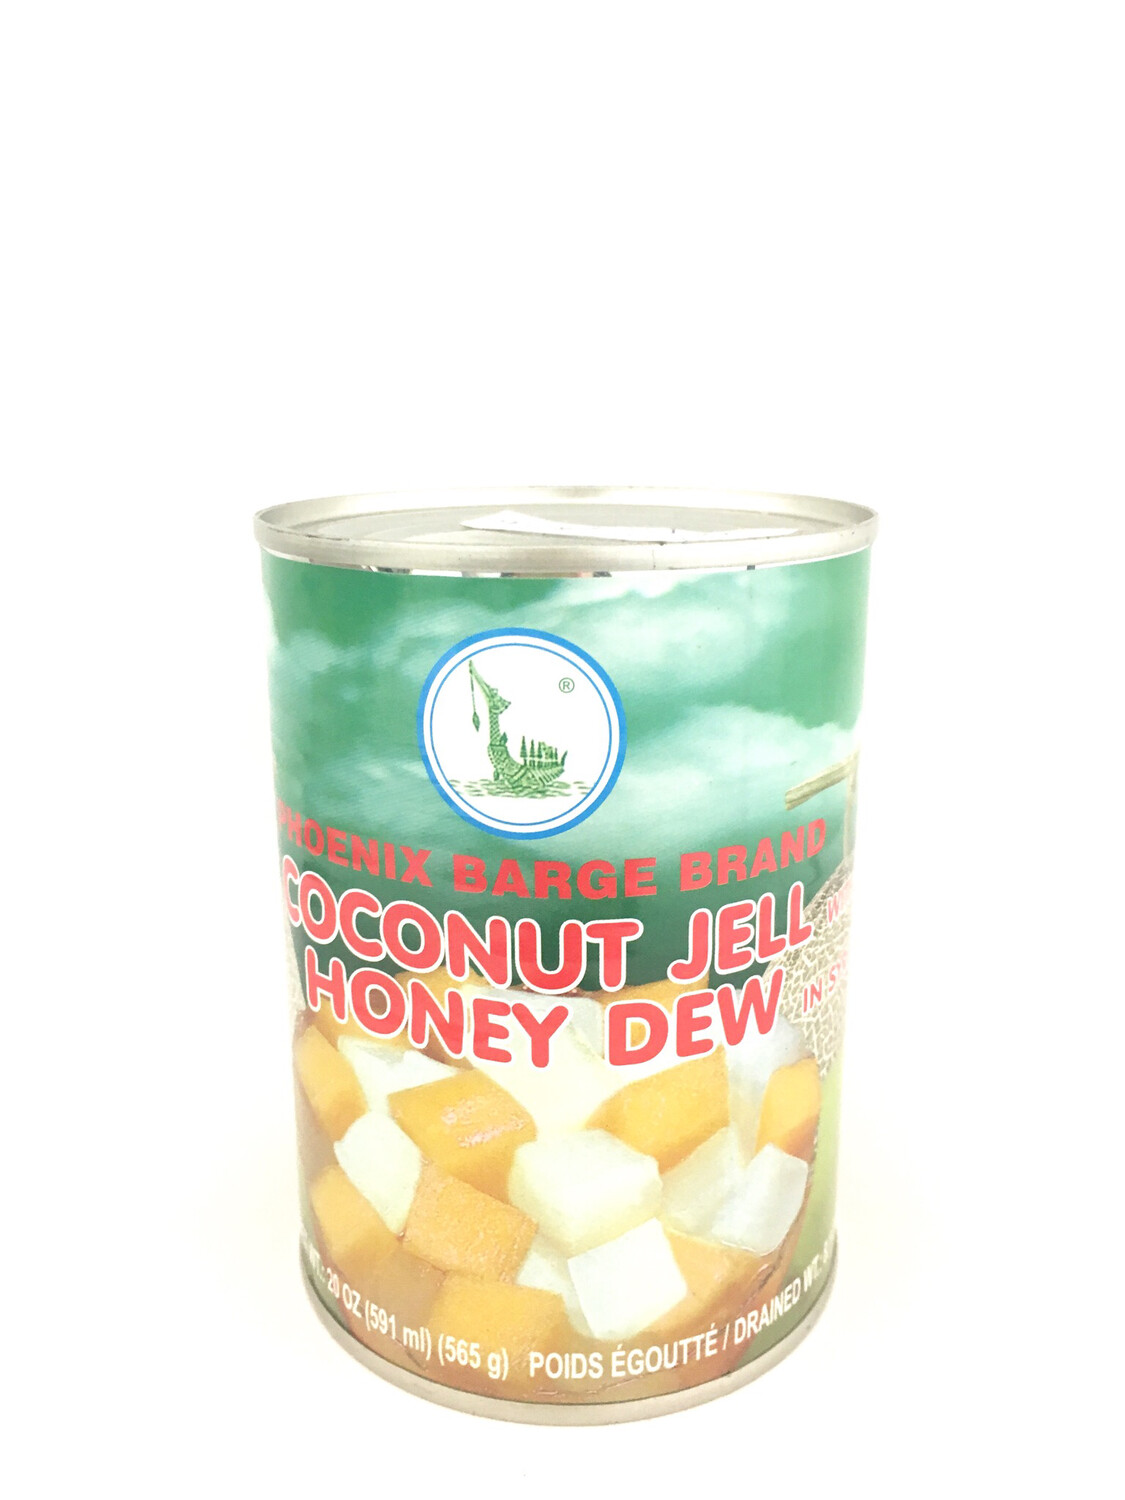 PHOENIX COCONUT JELLY WITH HONEY DEW IN SYRUP 24X20OZ